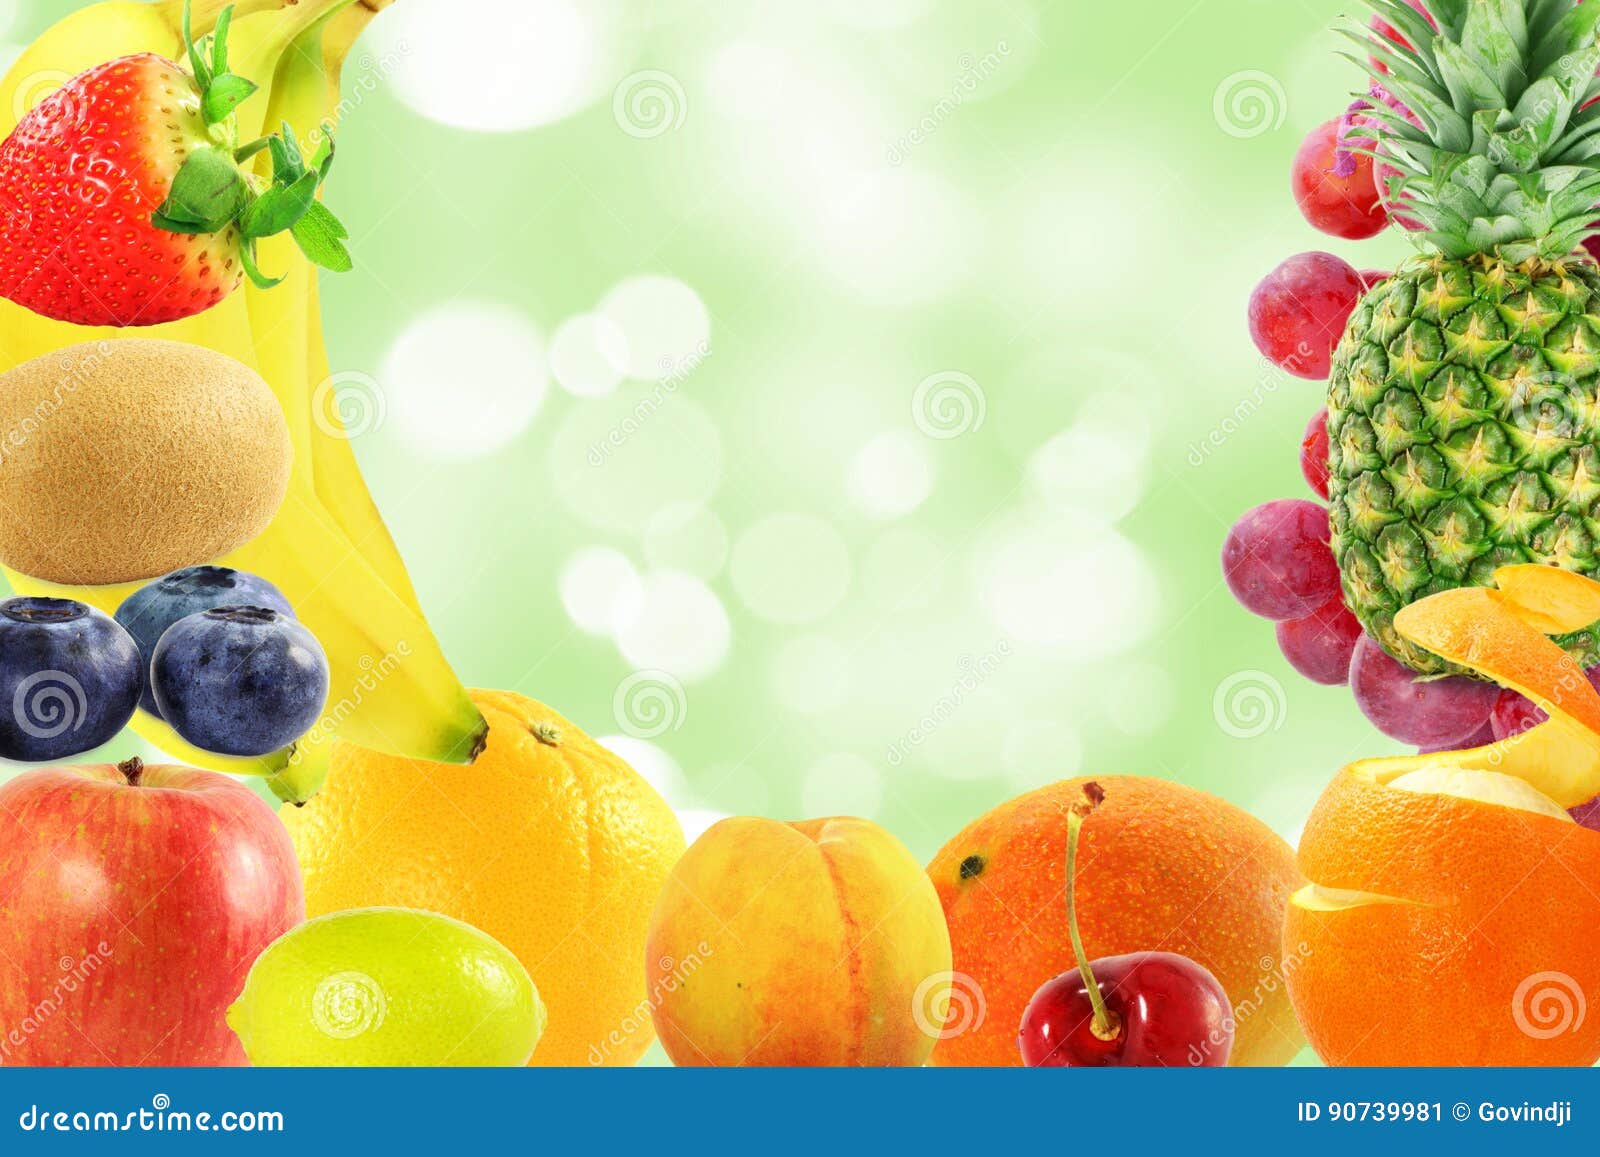 Mixed Fruits Background Healthy Food Life Style Living Concept Stock Image  - Image of indian, fruitjuice: 90739981